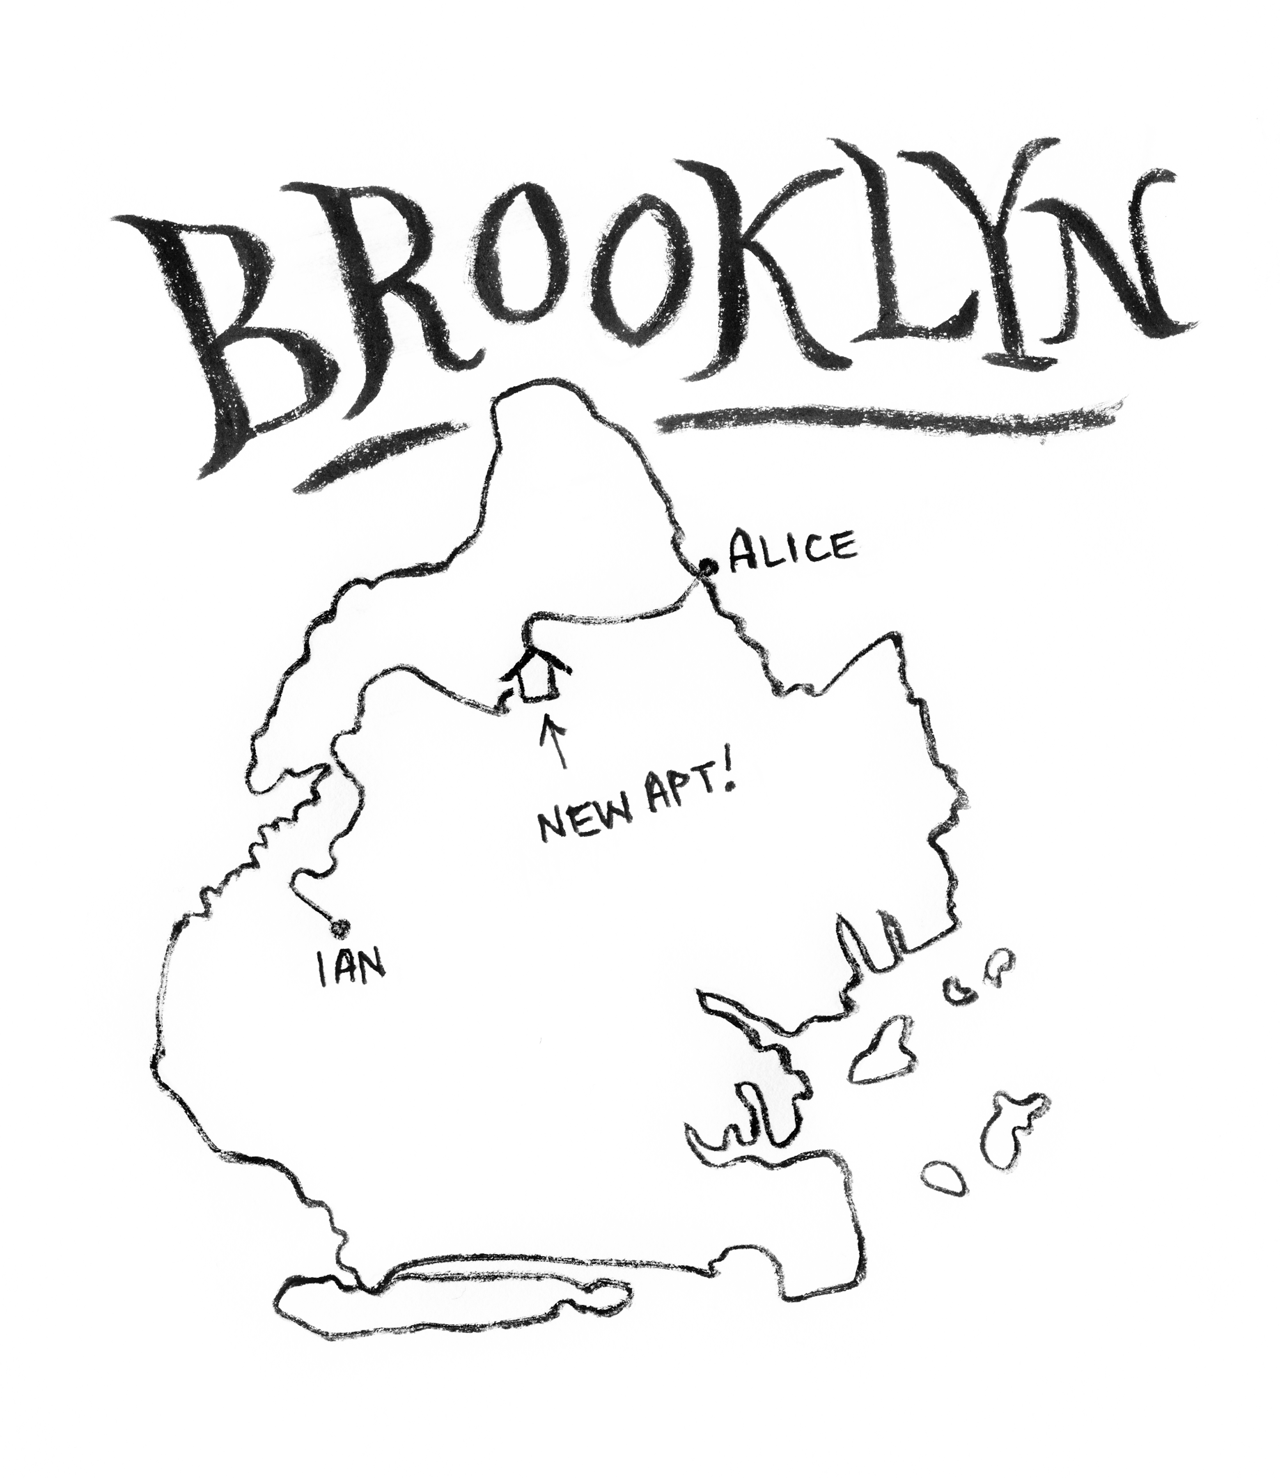 Line drawn map of Brooklyn. Twin moving vans driving from both Ridgewood and Sunset Park toward Bed-Stuy.